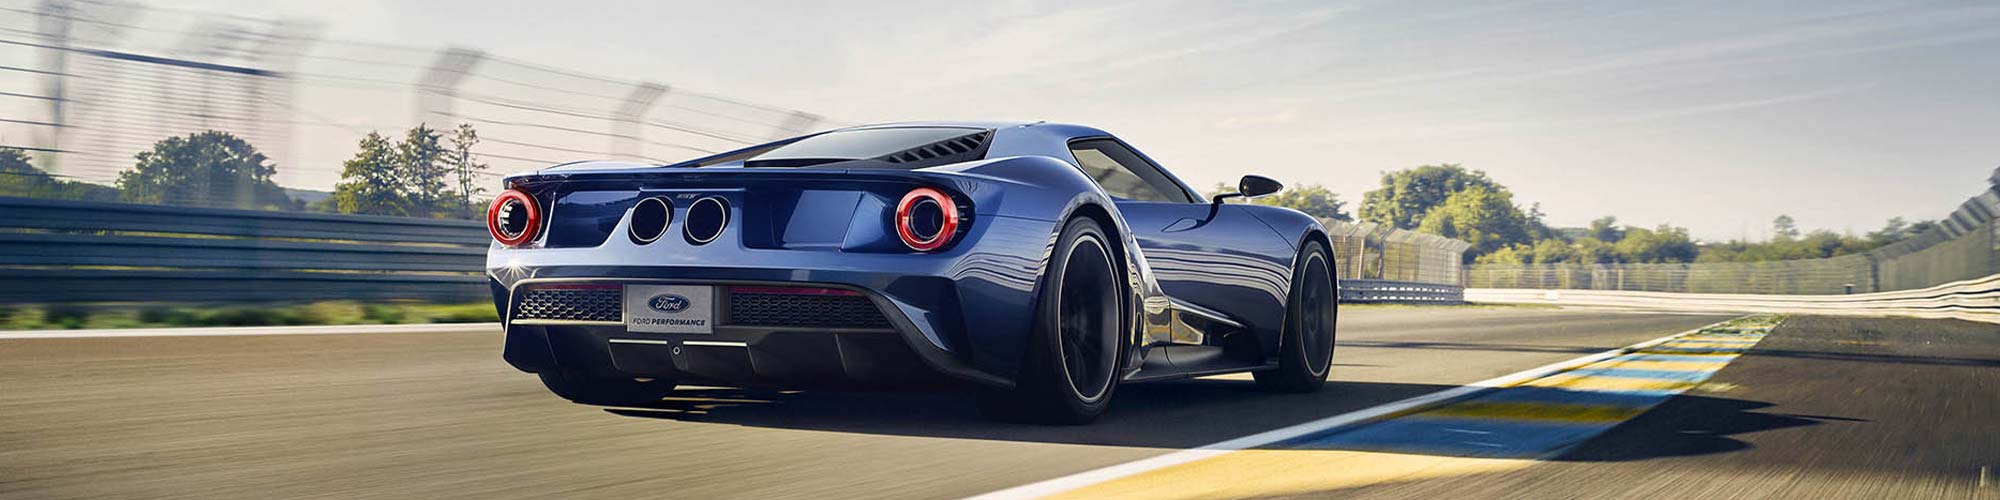 ford gt Banner